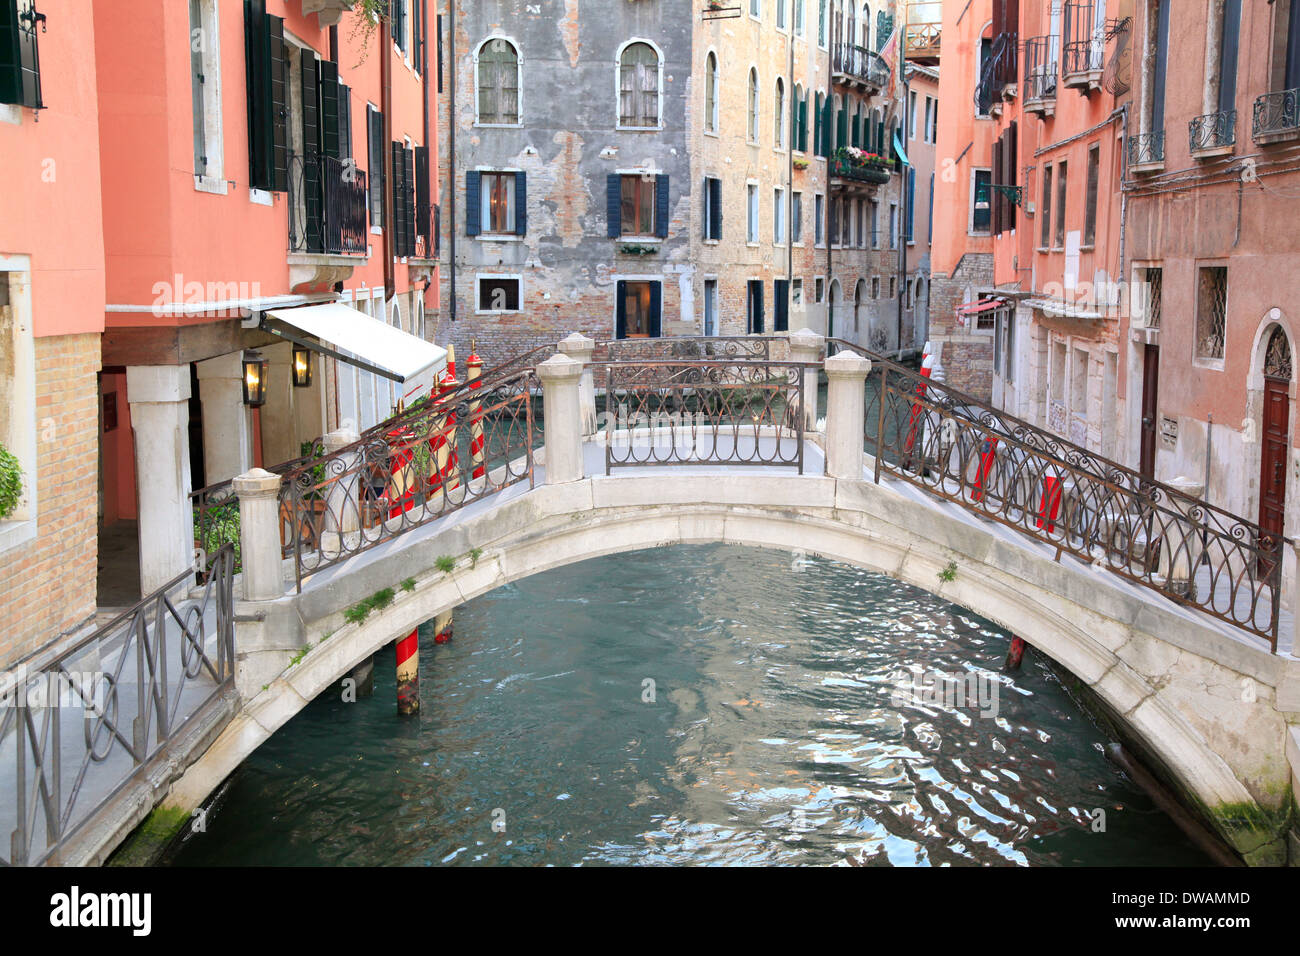 Bridge and canal in Venice, Italy Stock Photo